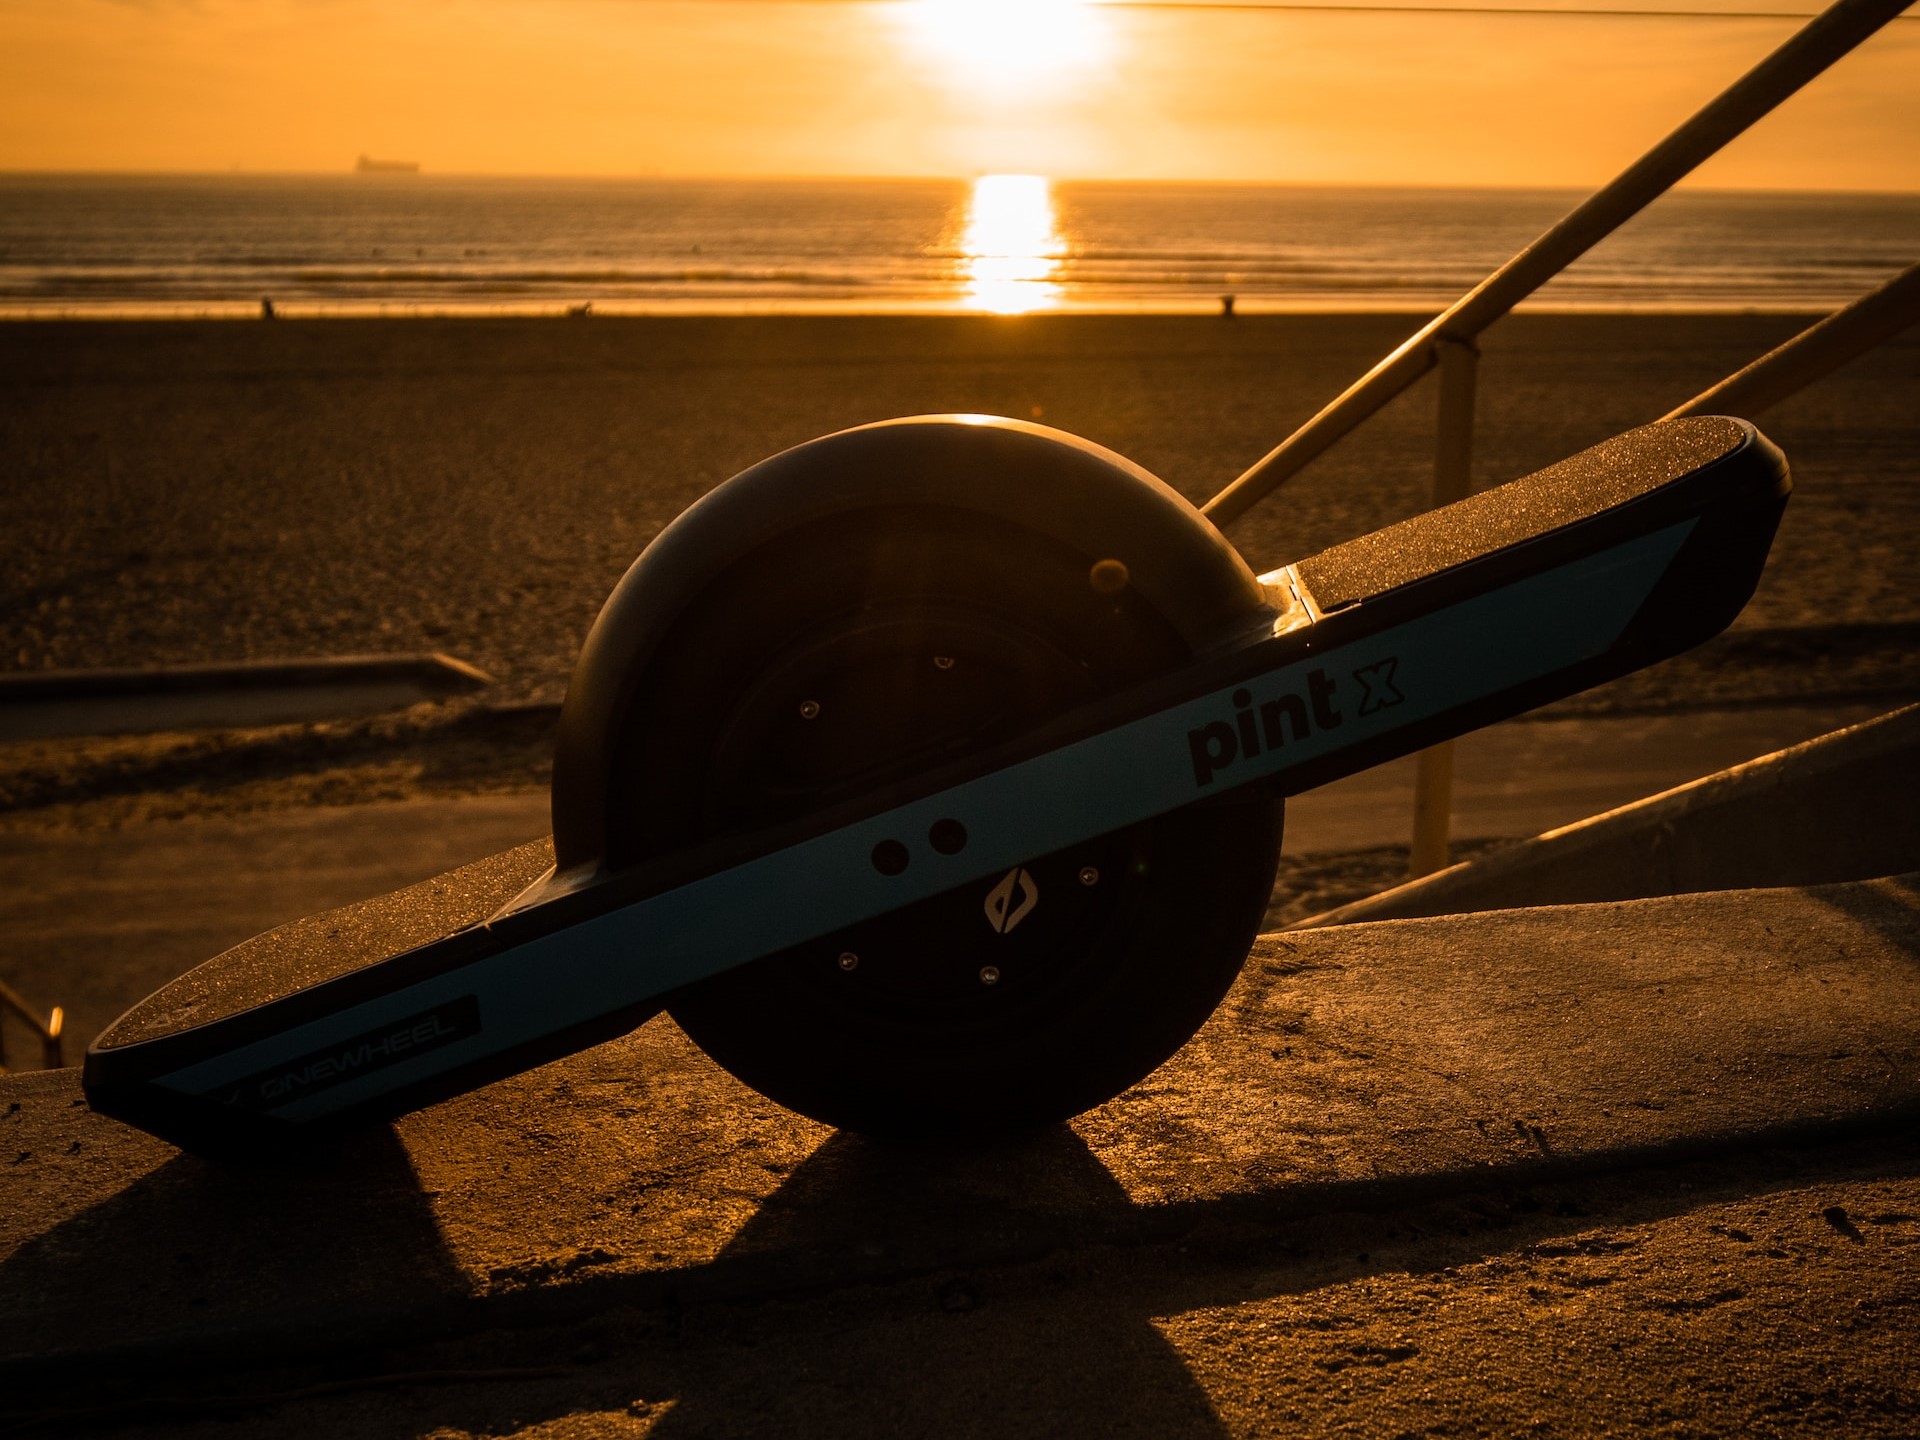 onewheel e skateboard with the sun setting in the background